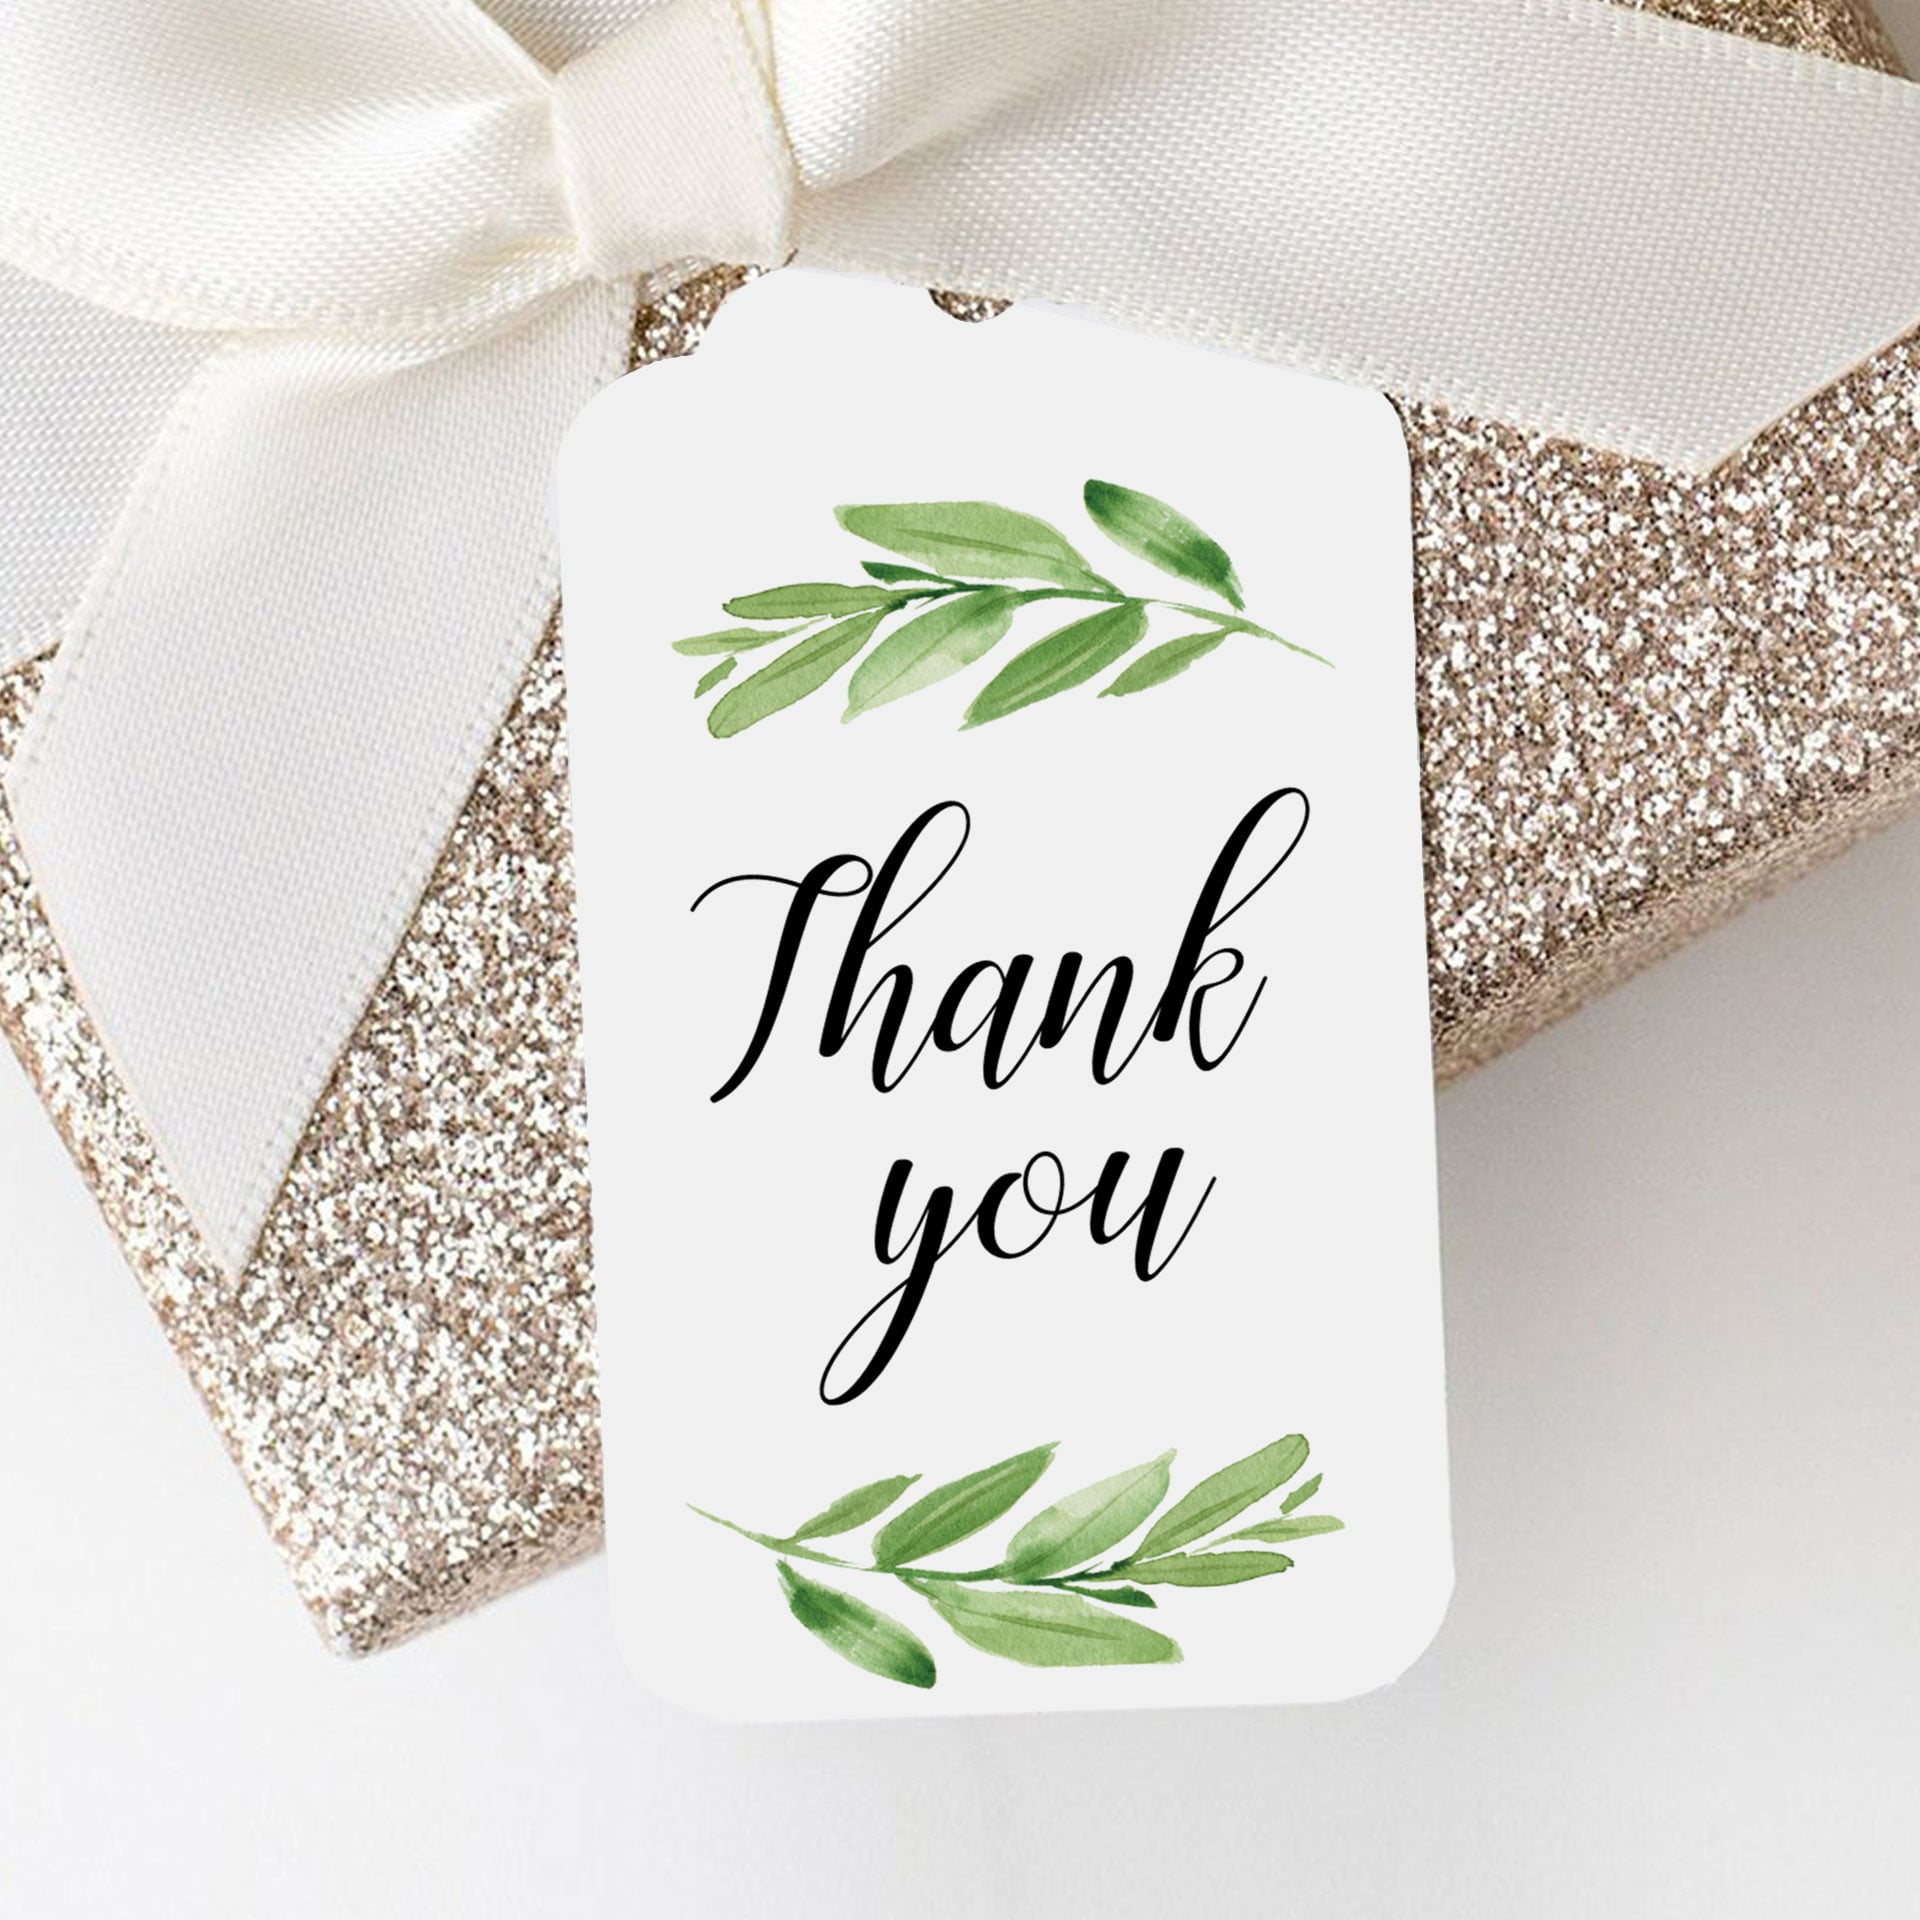 Greenery favor tag templates by LittleSizzle